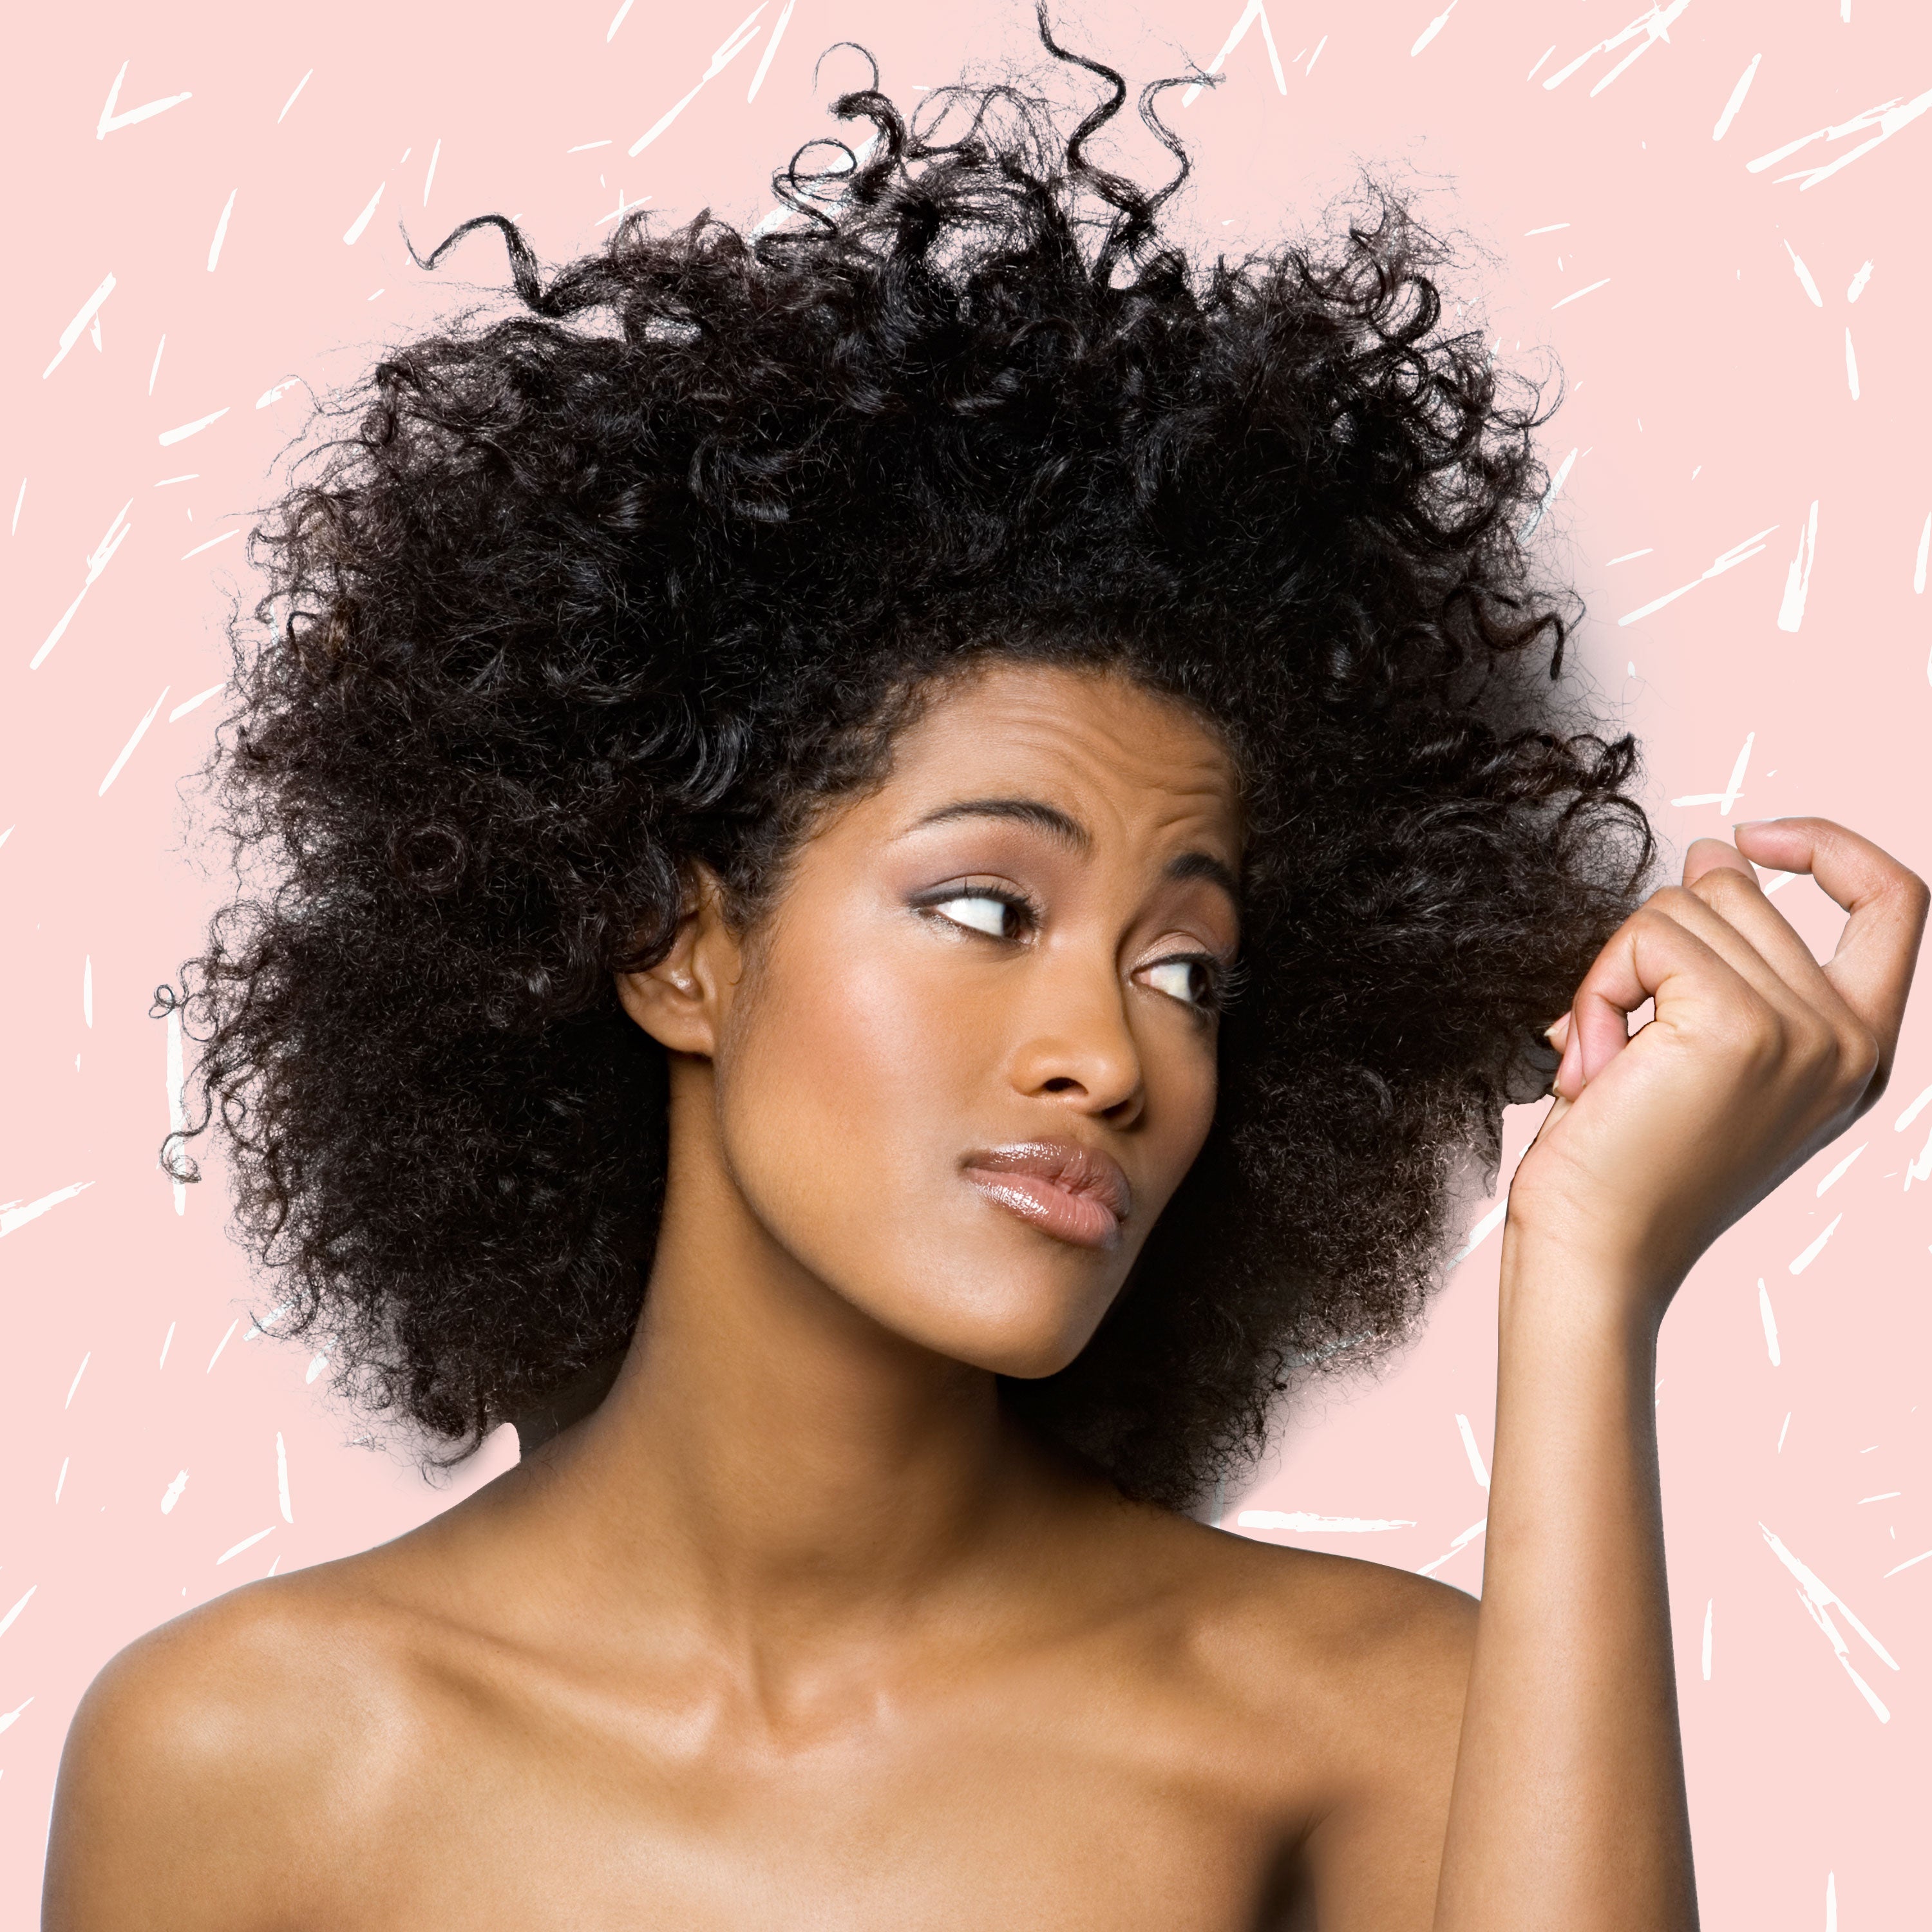 3 Things That Are Probably Making Your Winter Hair Drier